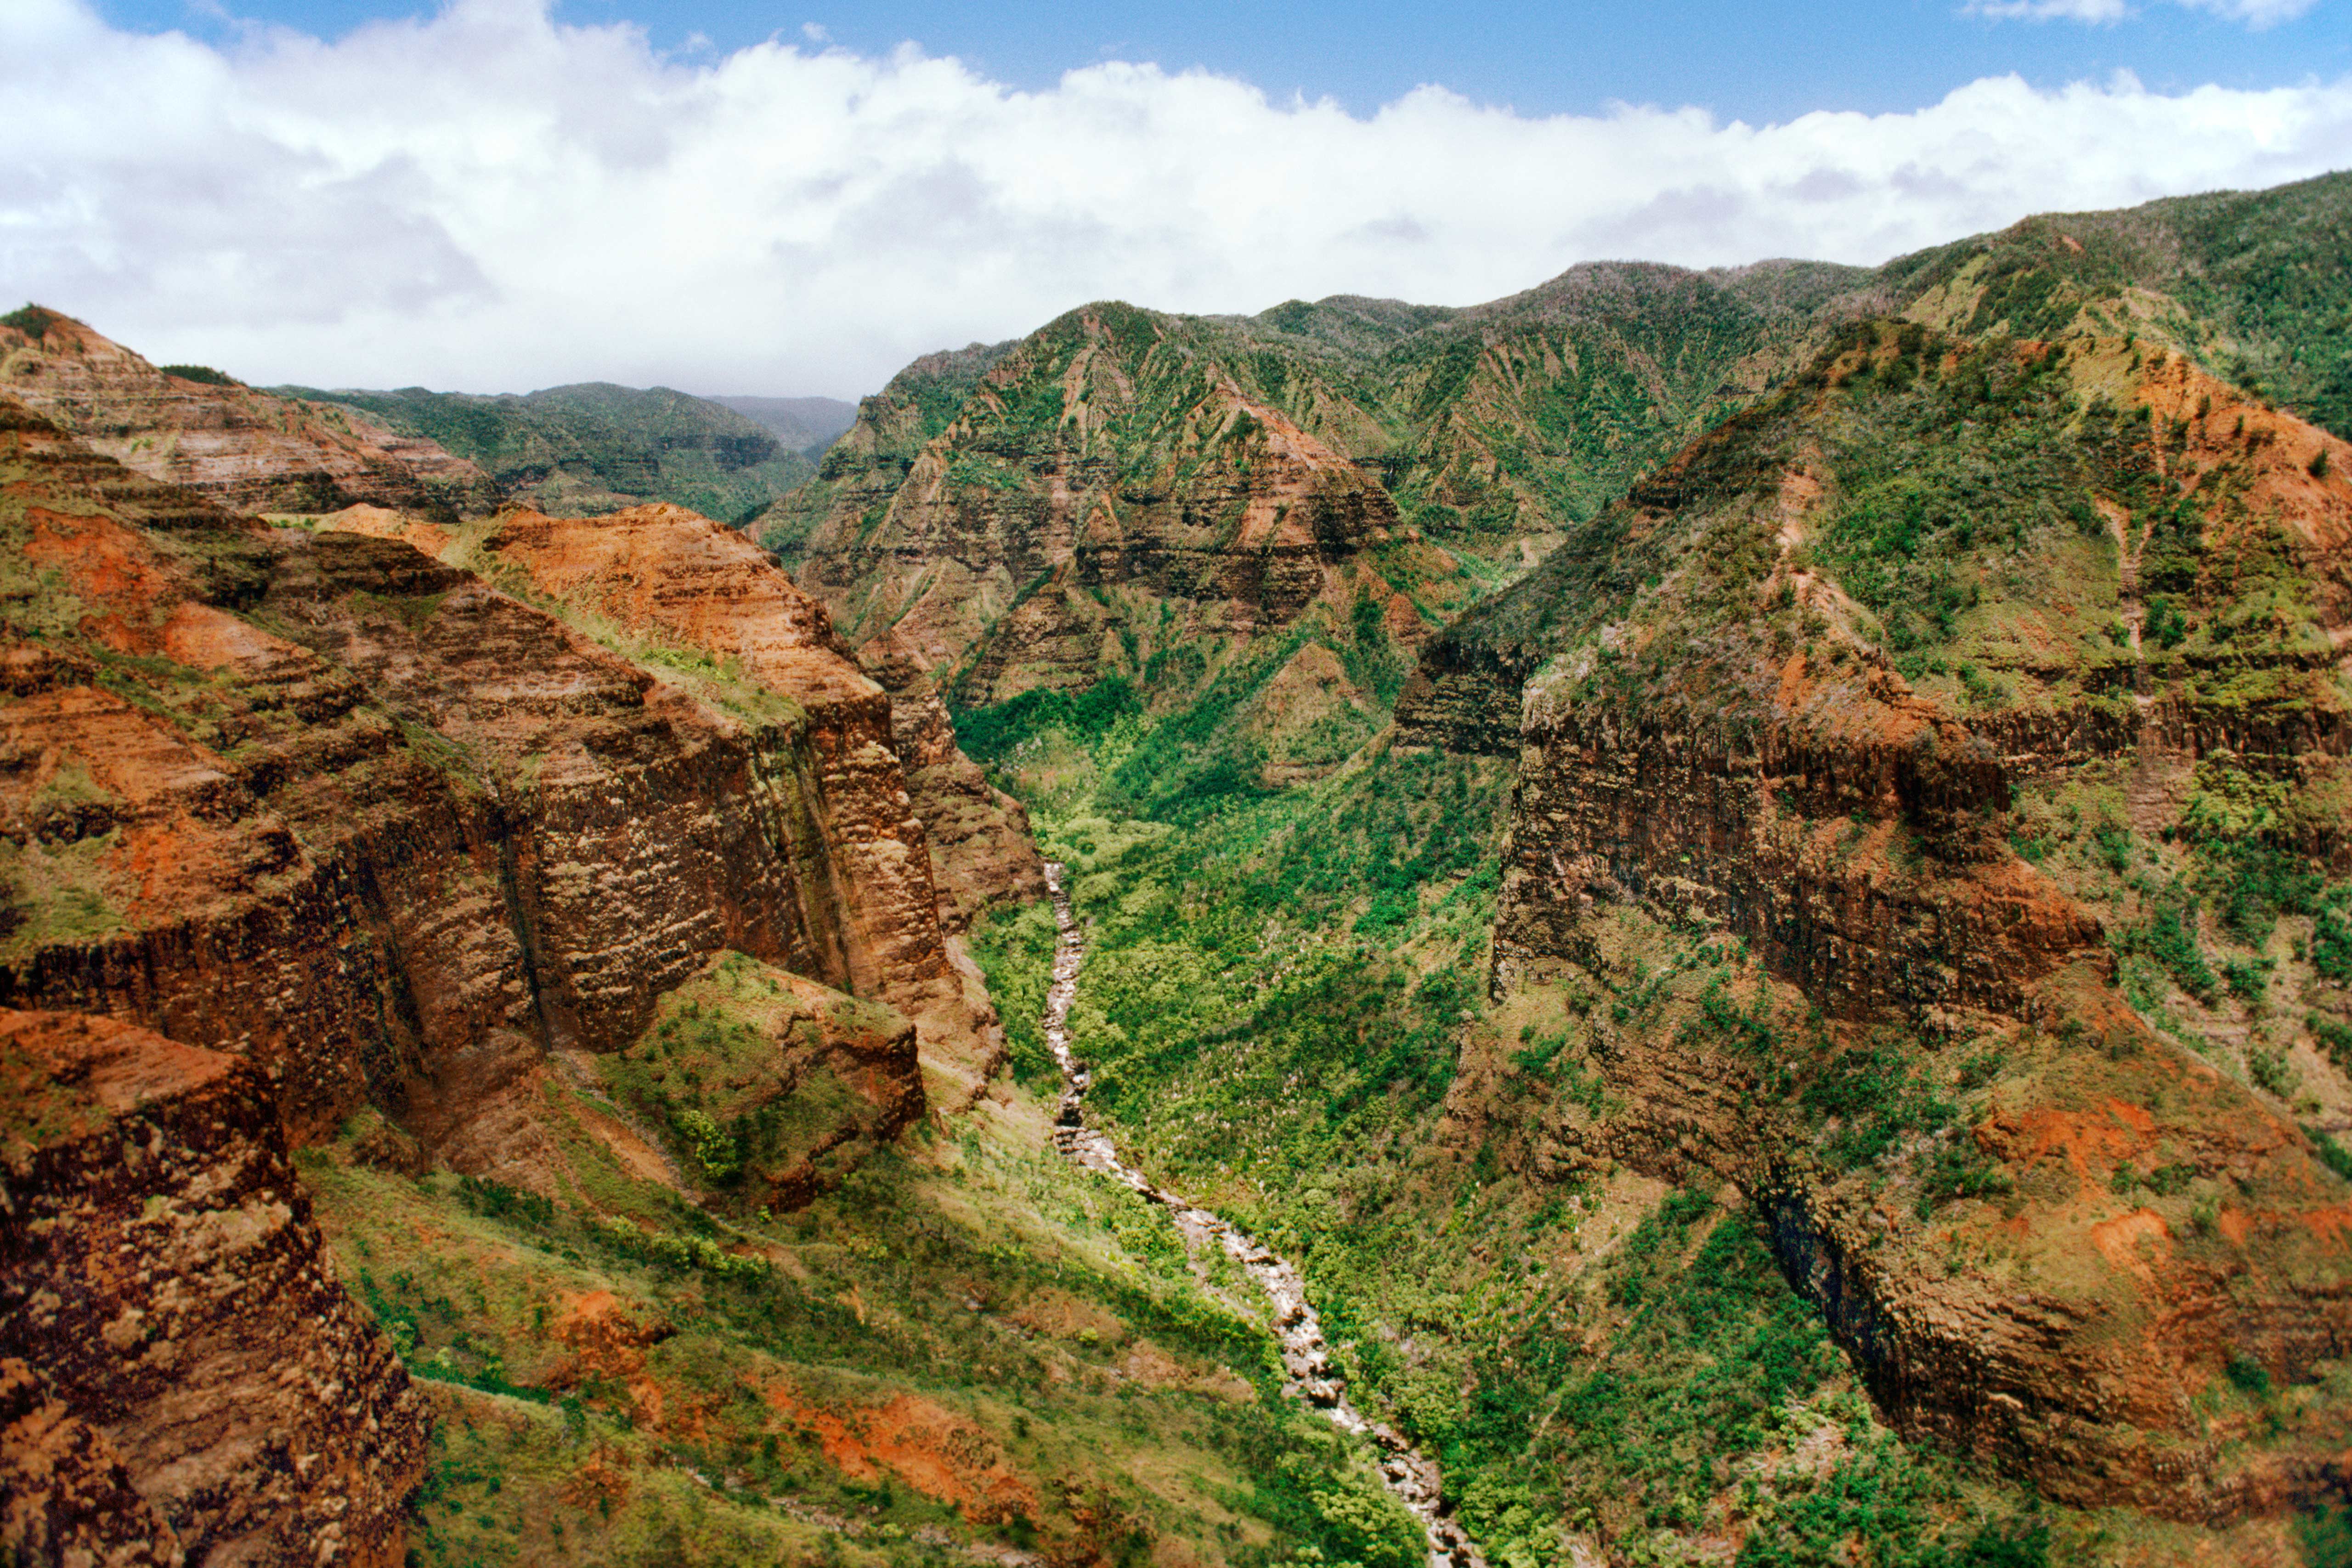 The ‘Grand Canyon of the Pacific’, Waimea Canyon offers some of the grandest views in Kauaʻi. Image by Frans Lanting / Mint Images / Getty